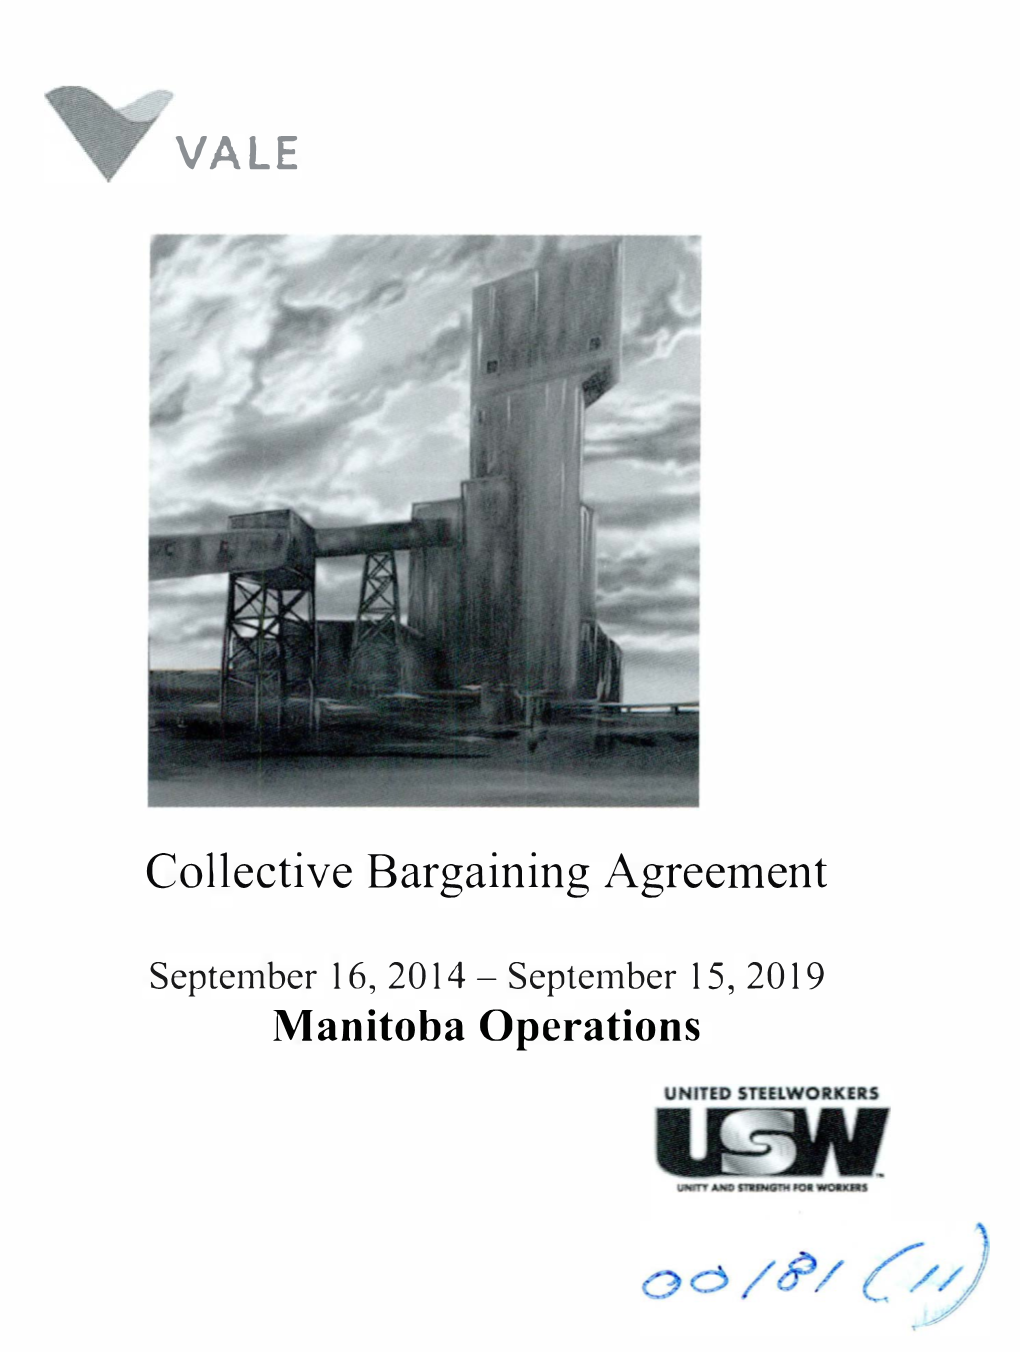 VALE Collective Bargaining Agreement Manitoba Operations